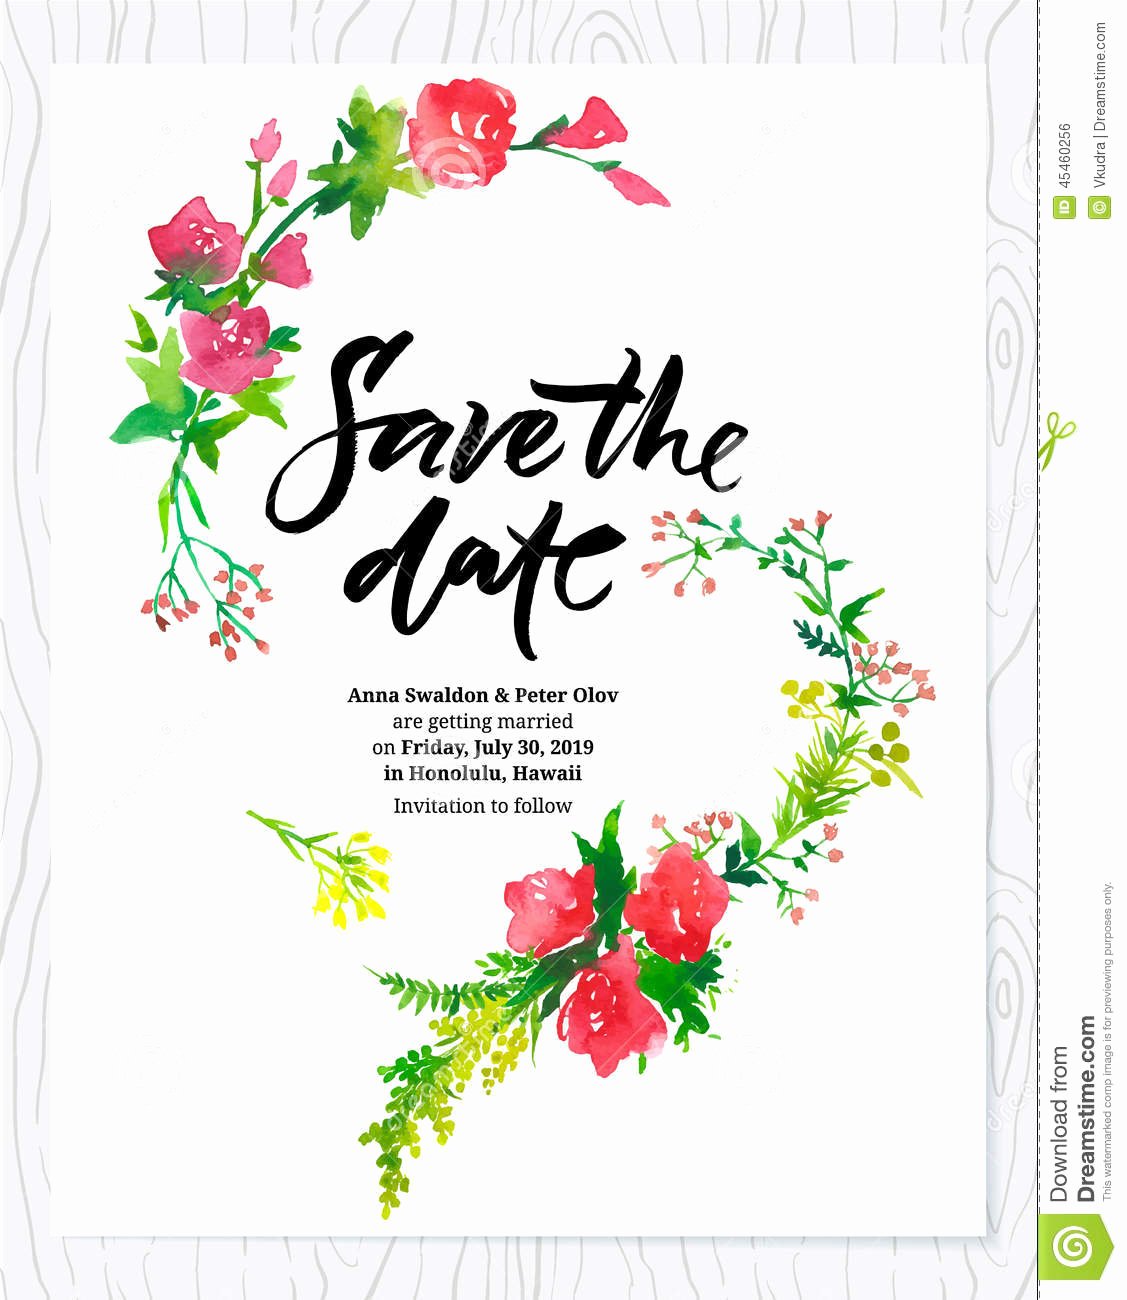 Floral Invitation Template Beautiful Wedding Floral Watercolor Card Save the Date Stock Vector